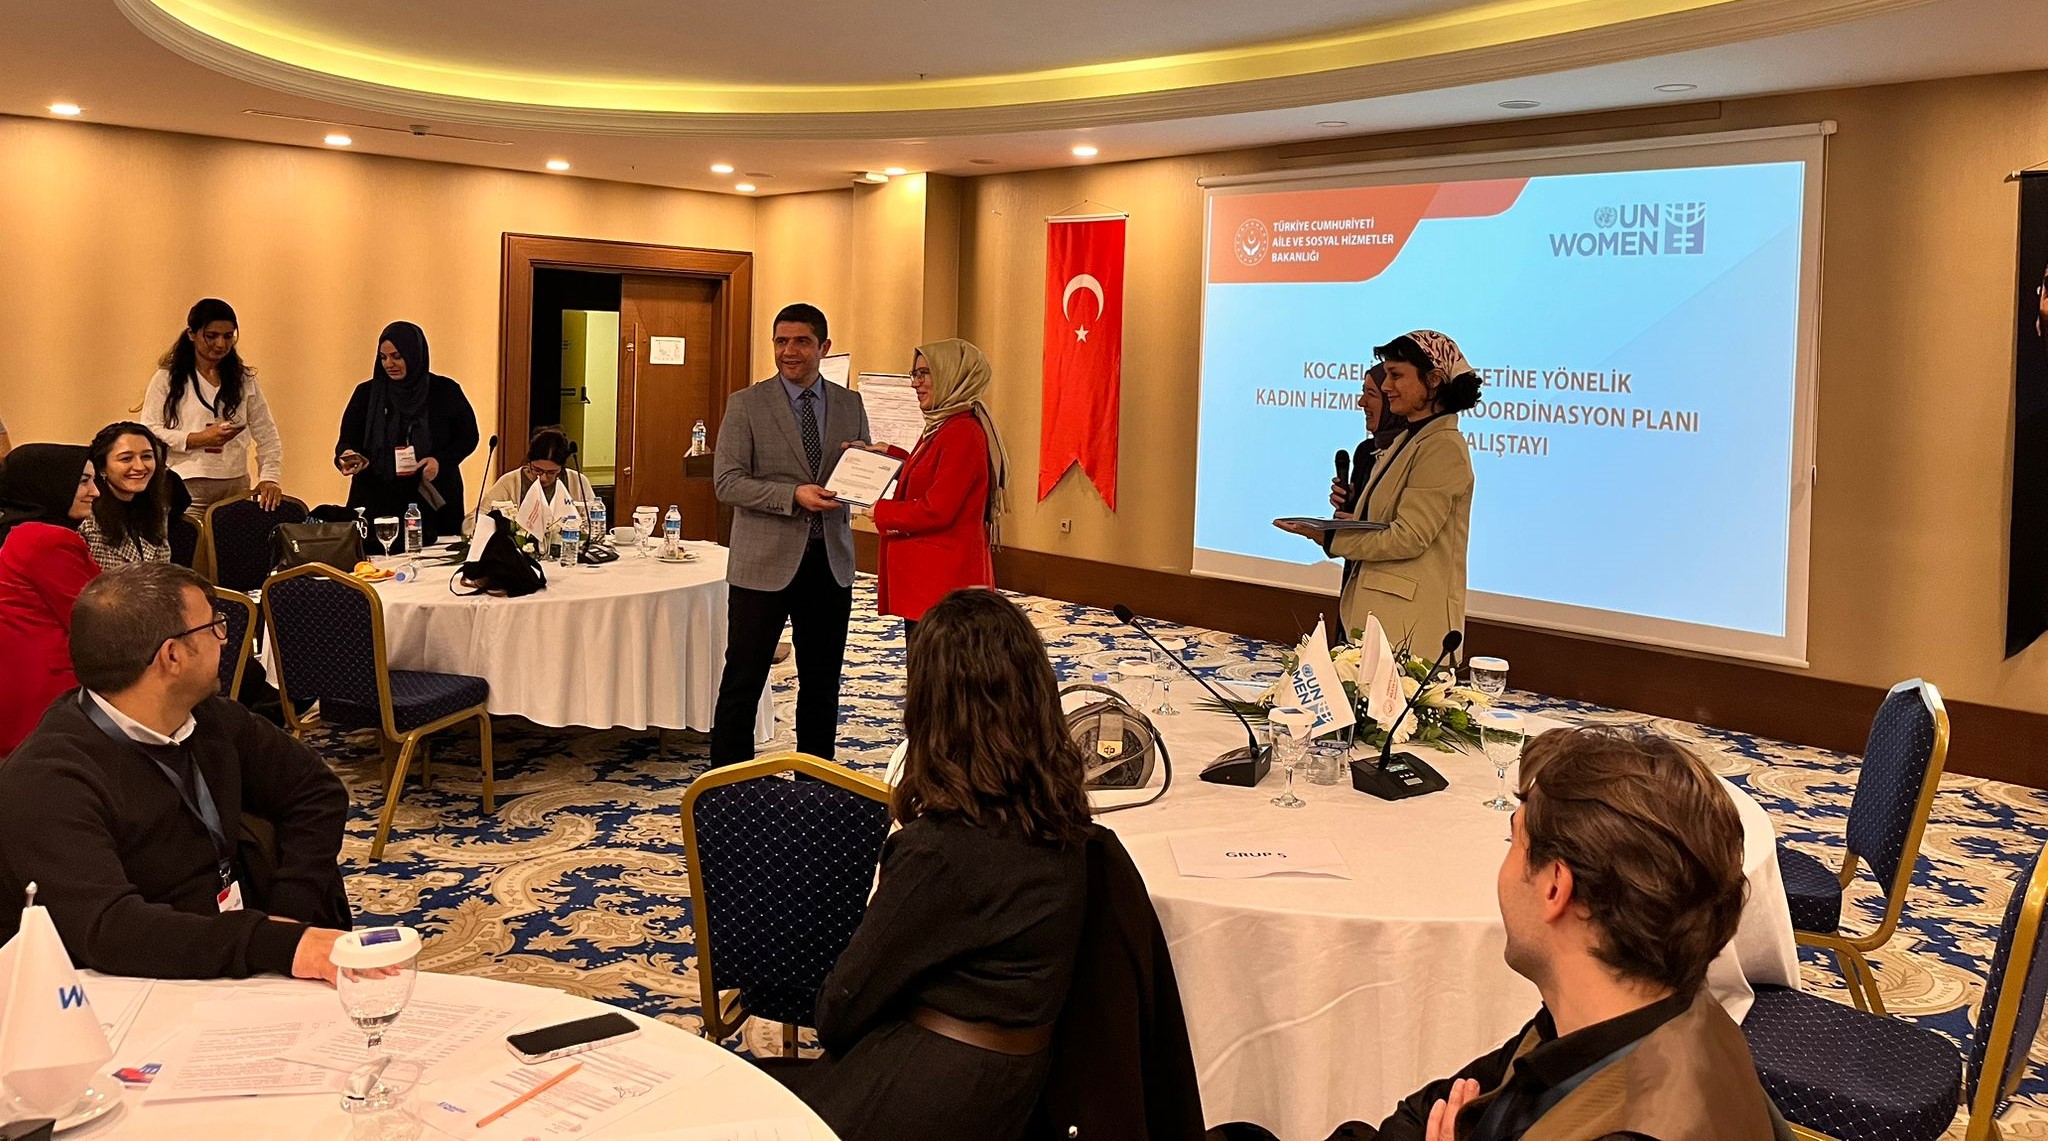 Participants are receiving certificates after the workshop for Emergency Coordination Plan for Women Services with respective instutions in Kocaeli. Photo: UN Women